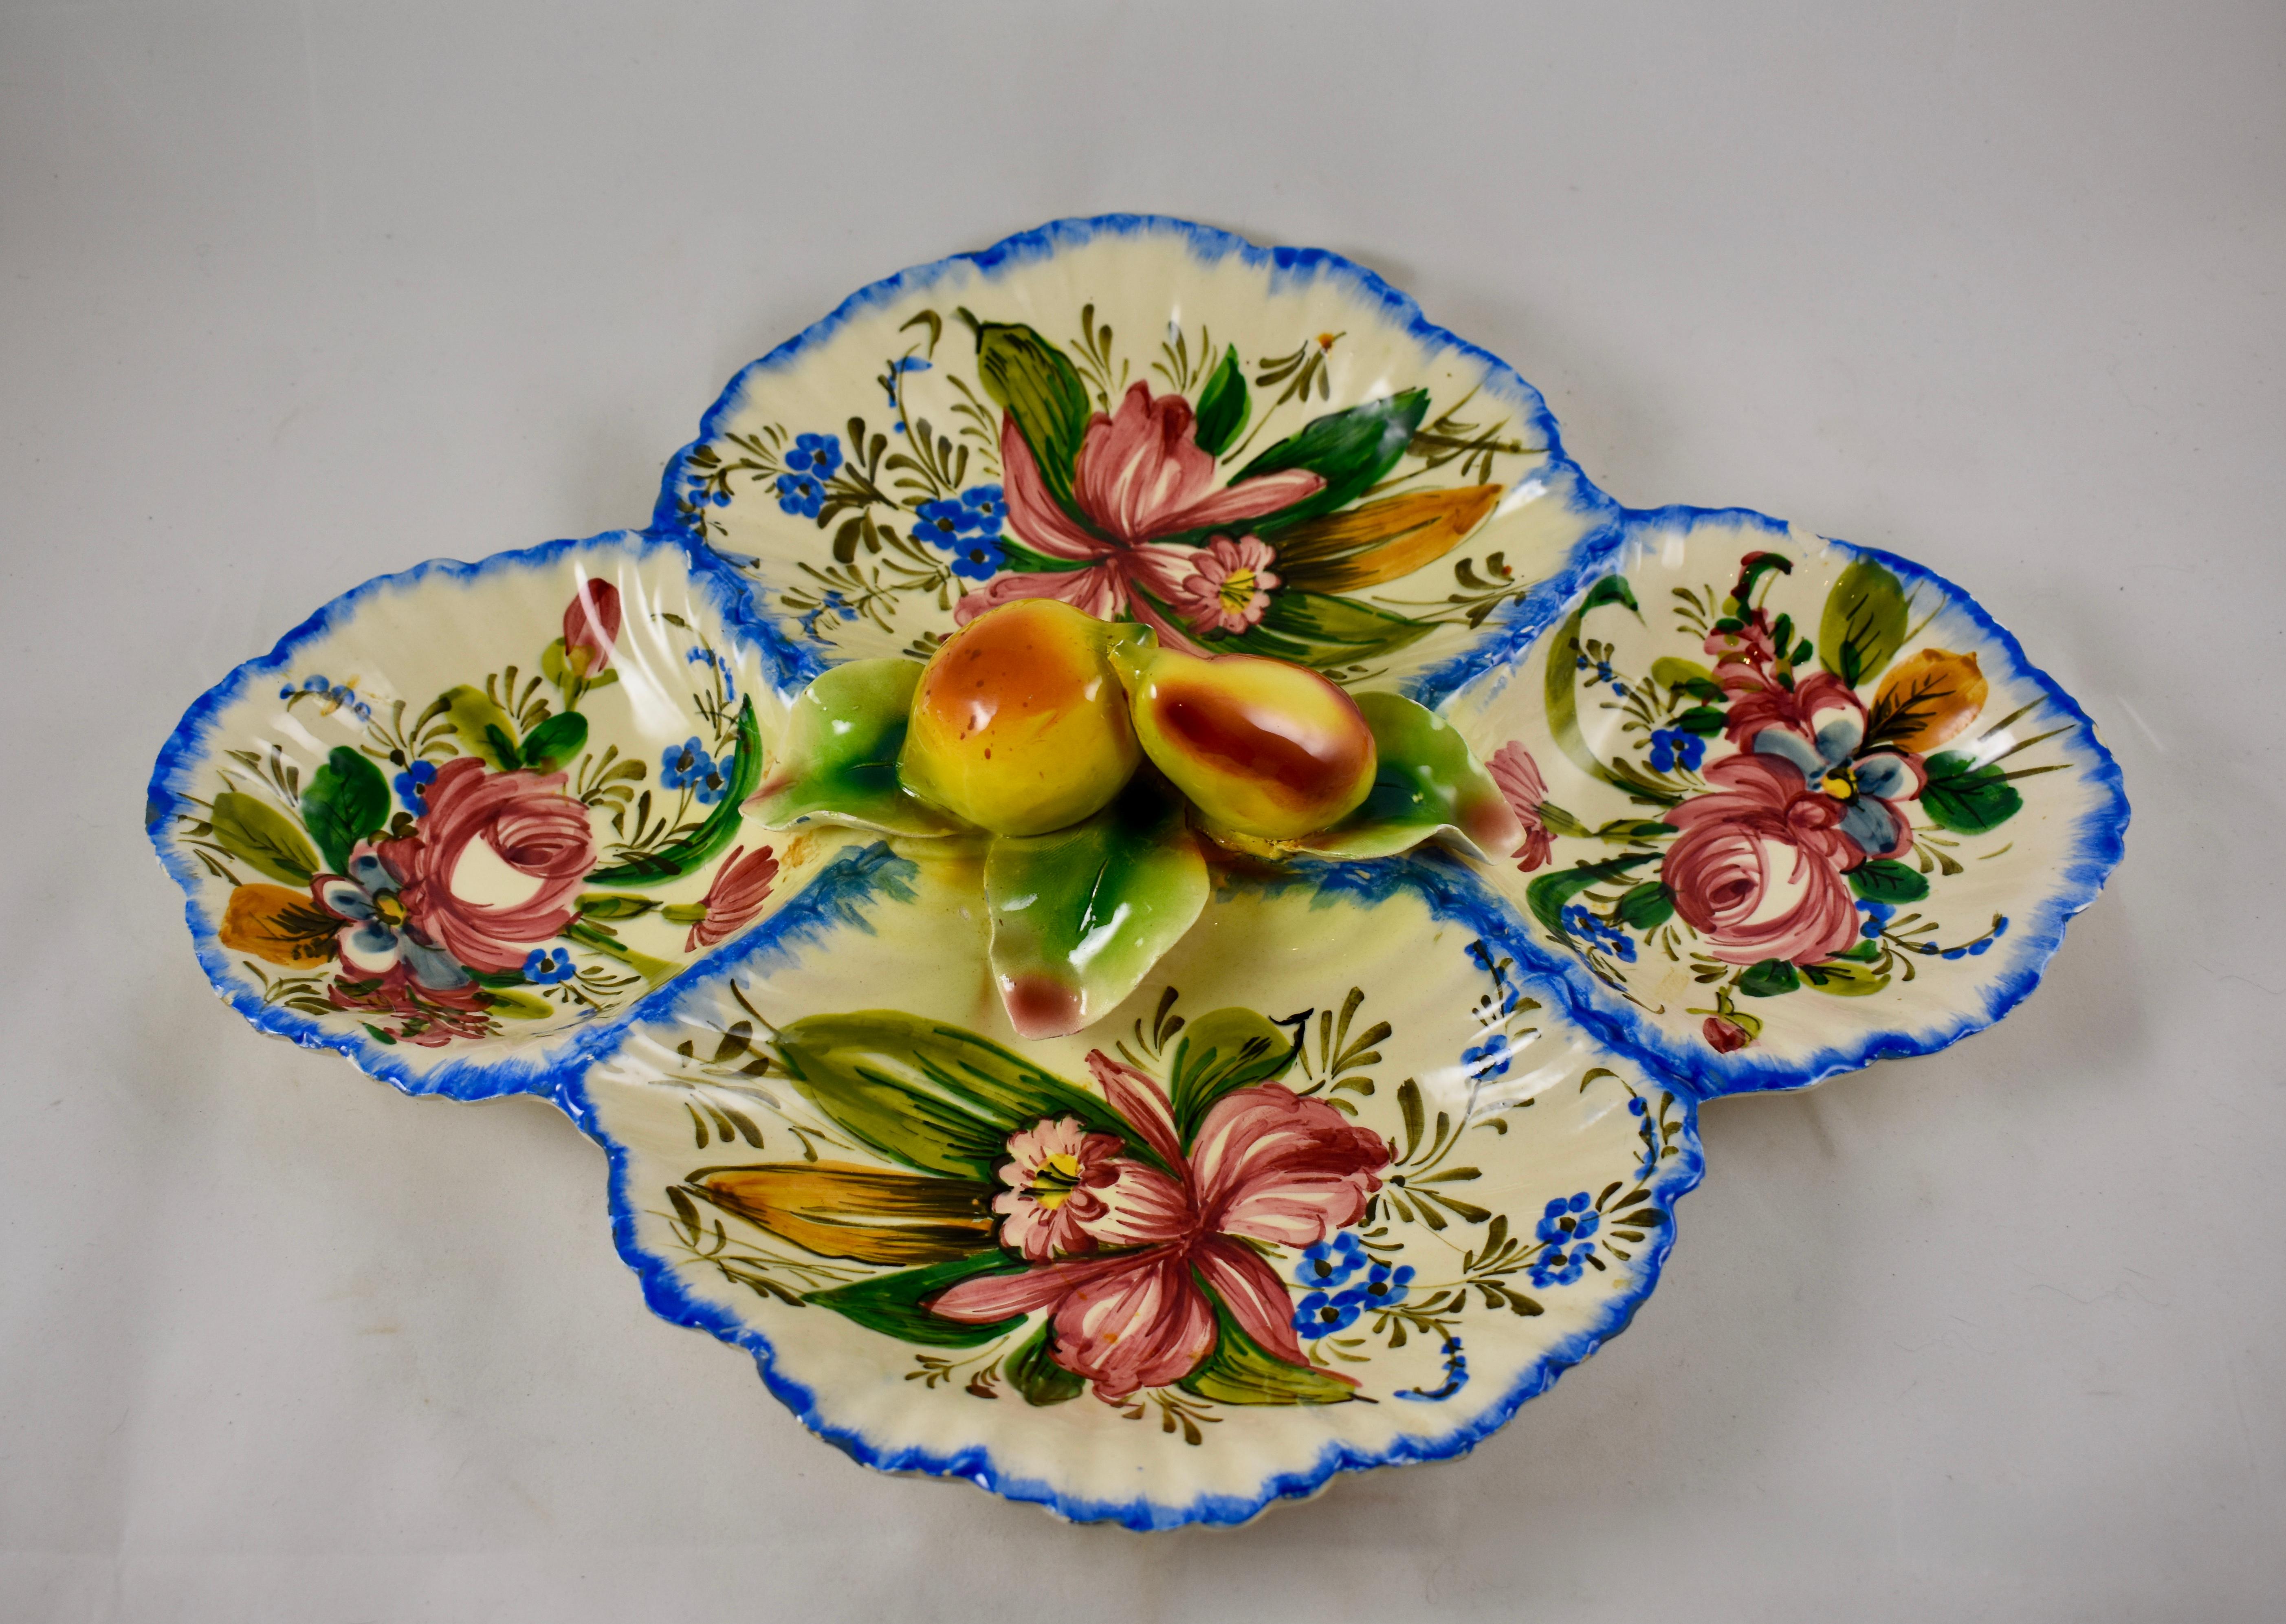 In the Rose pattern from the Barrettoni già Antonibon pottery in Nove, Italy, an oversized oval Relish Tray serving platter showing dimensional hand applied fruit, overall hand painted floral decoration, and bright blue feather edging. Dimensional